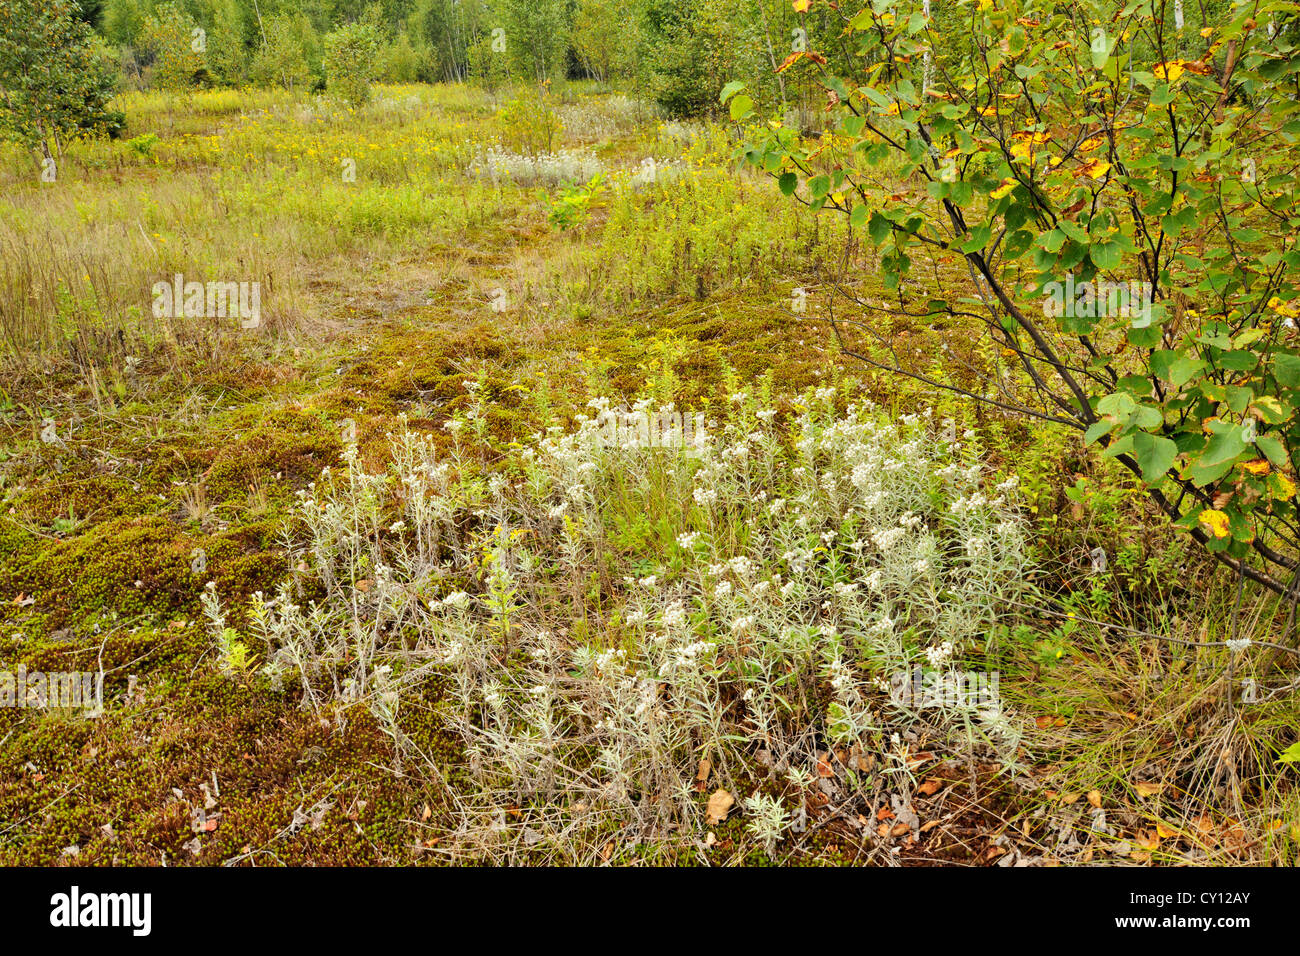 Late summer meadow with pearly everlasting, Greater Sudbury, Ontario, Canada Stock Photo